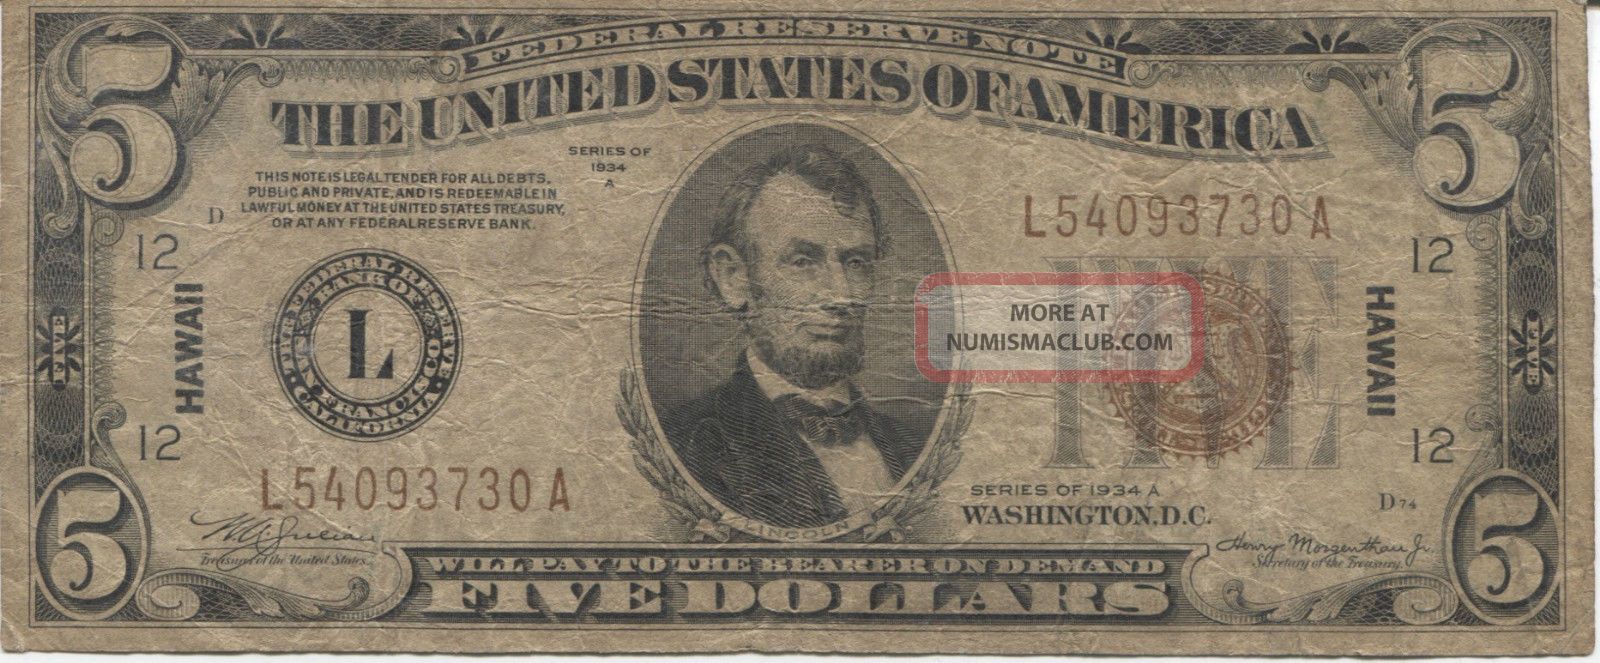 Series 1934 A $5 Hawaii Silver Certificate Small Size Notes photo